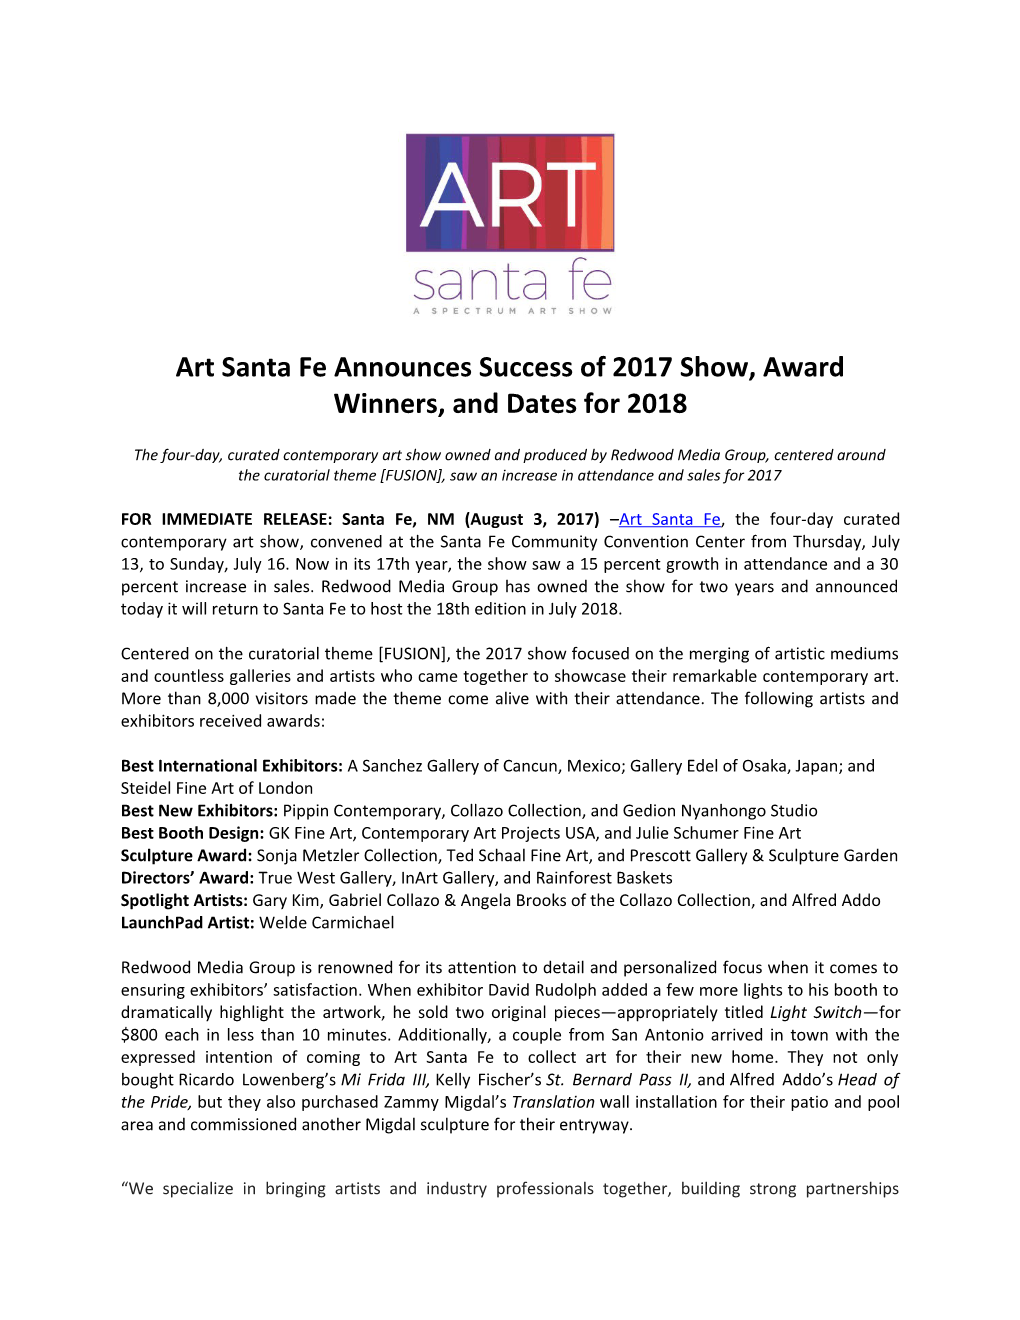 Art Santa Fe Announces Success of 2017 Show, Award Winners, and Dates for 2018